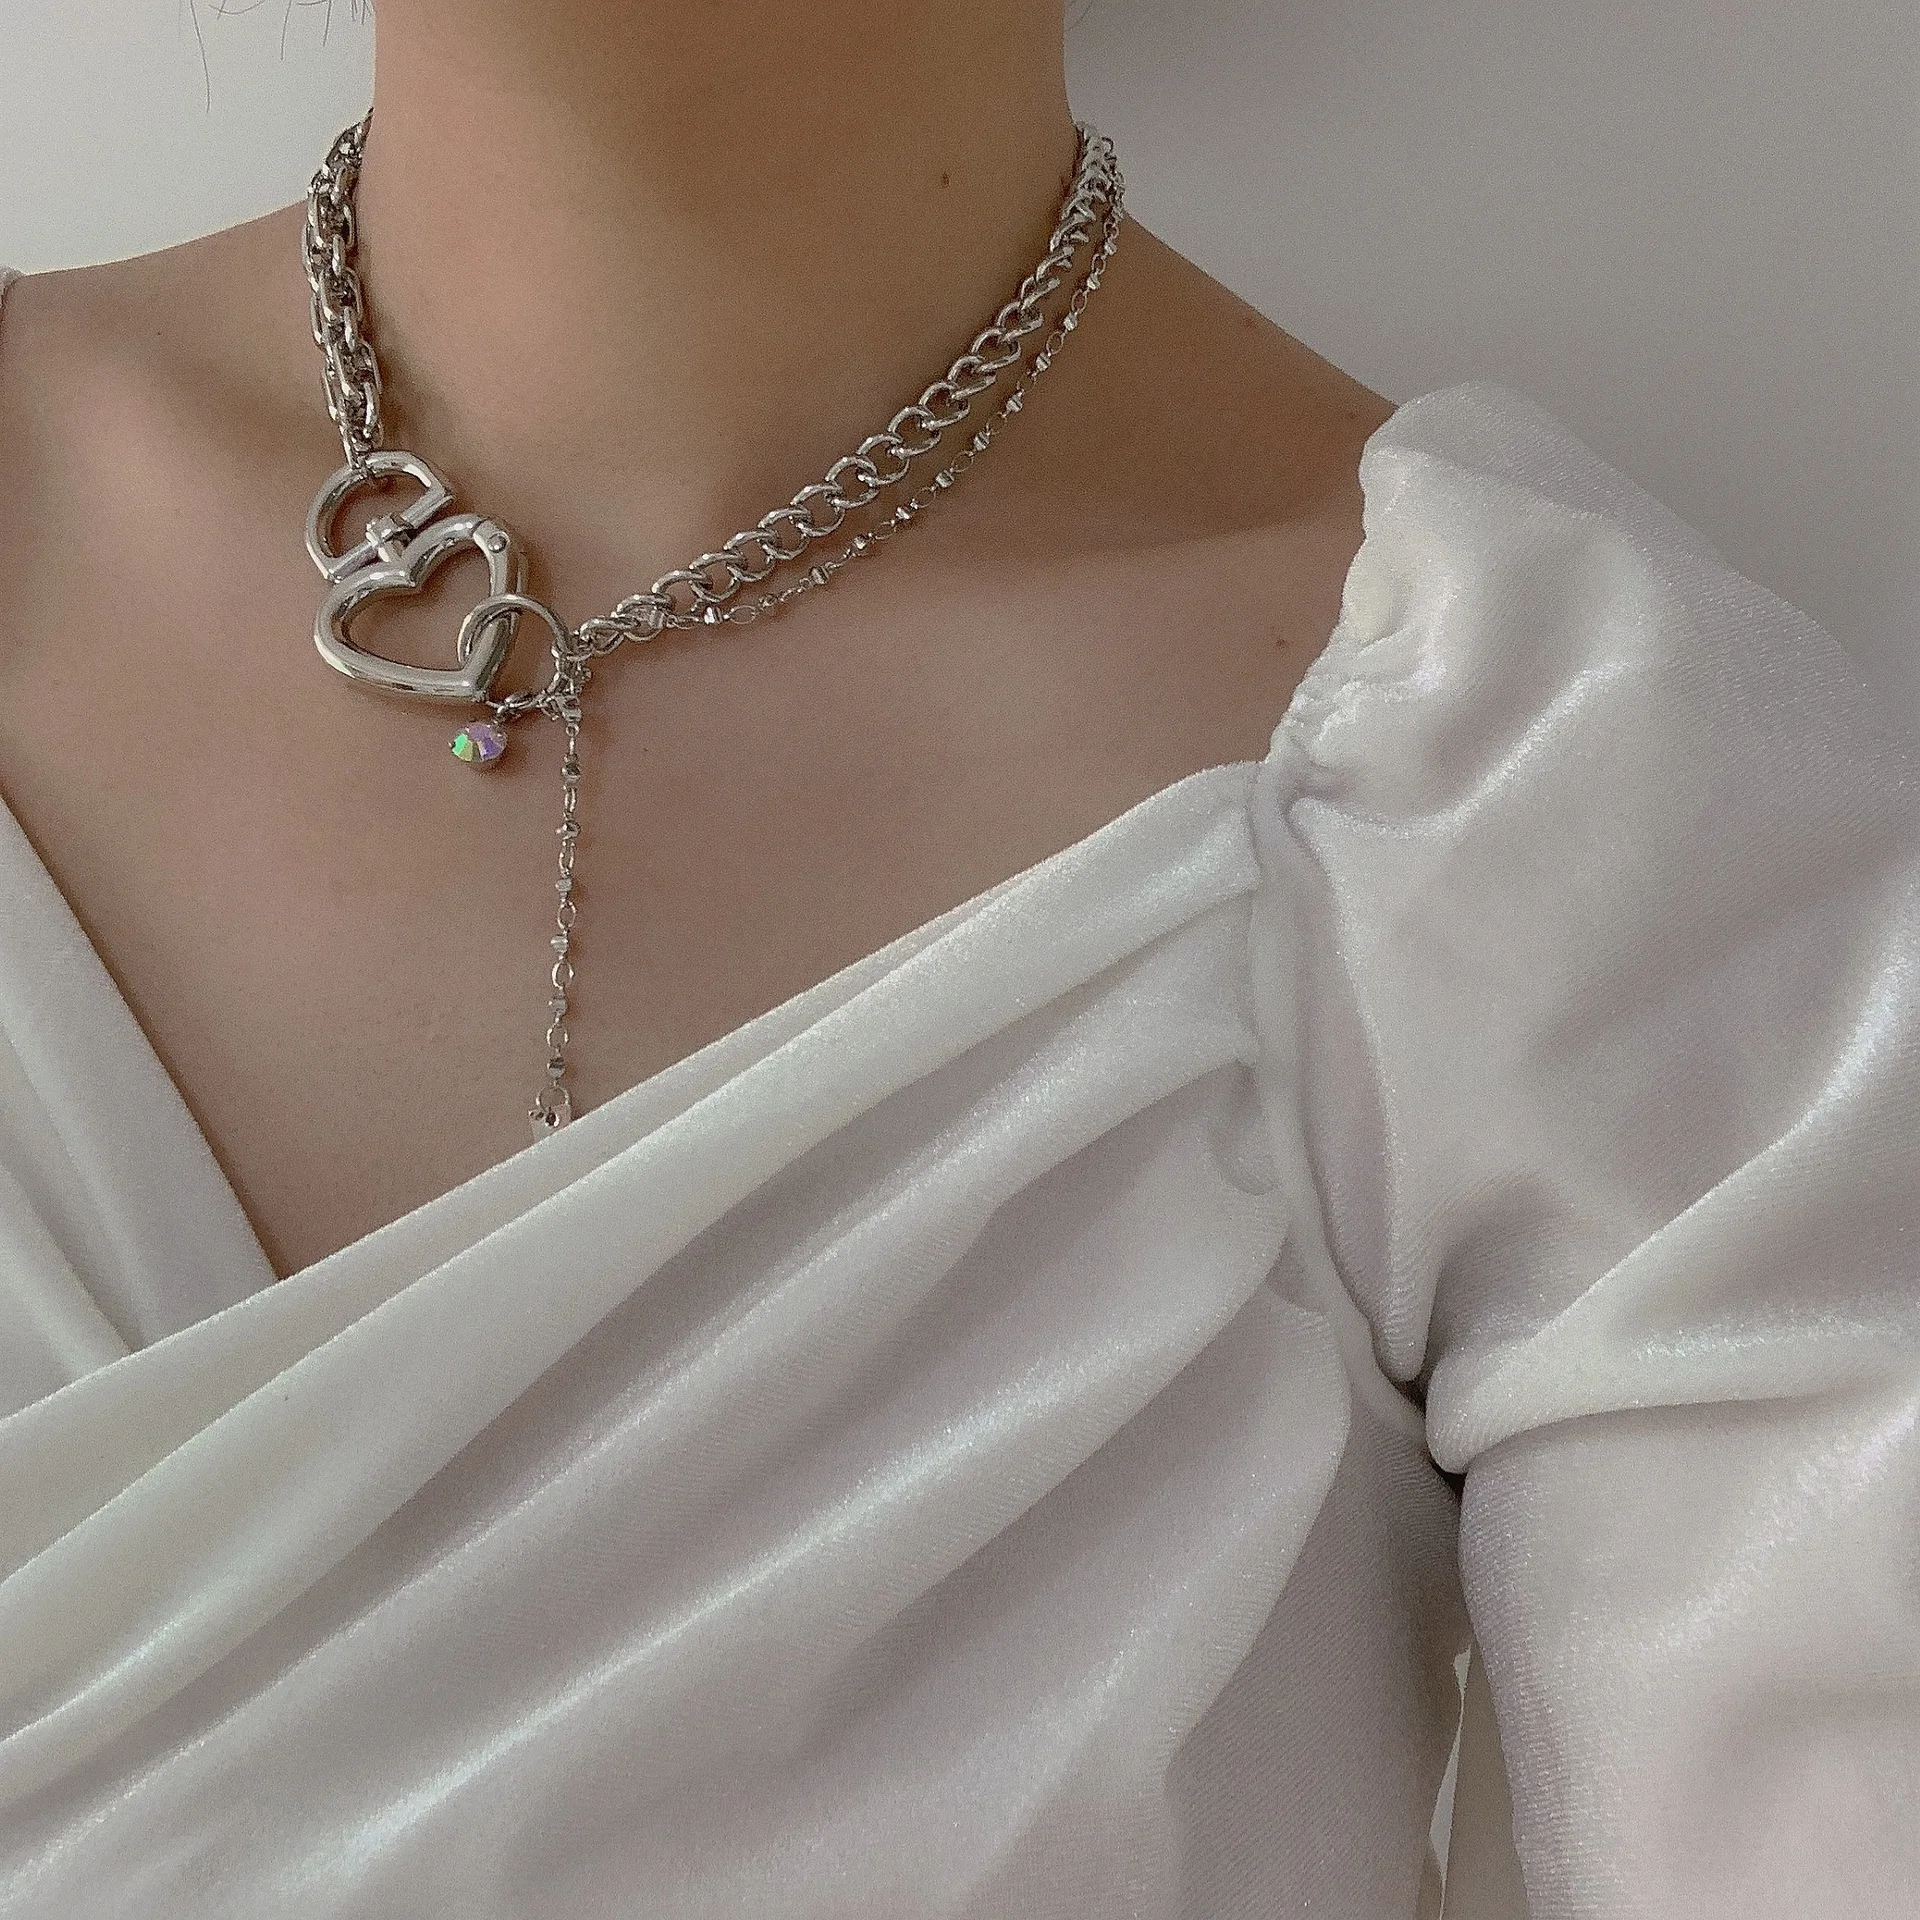 

JUHU Metal thick chain necklace clavicle chain choker love lock necklace short for women, Sliver